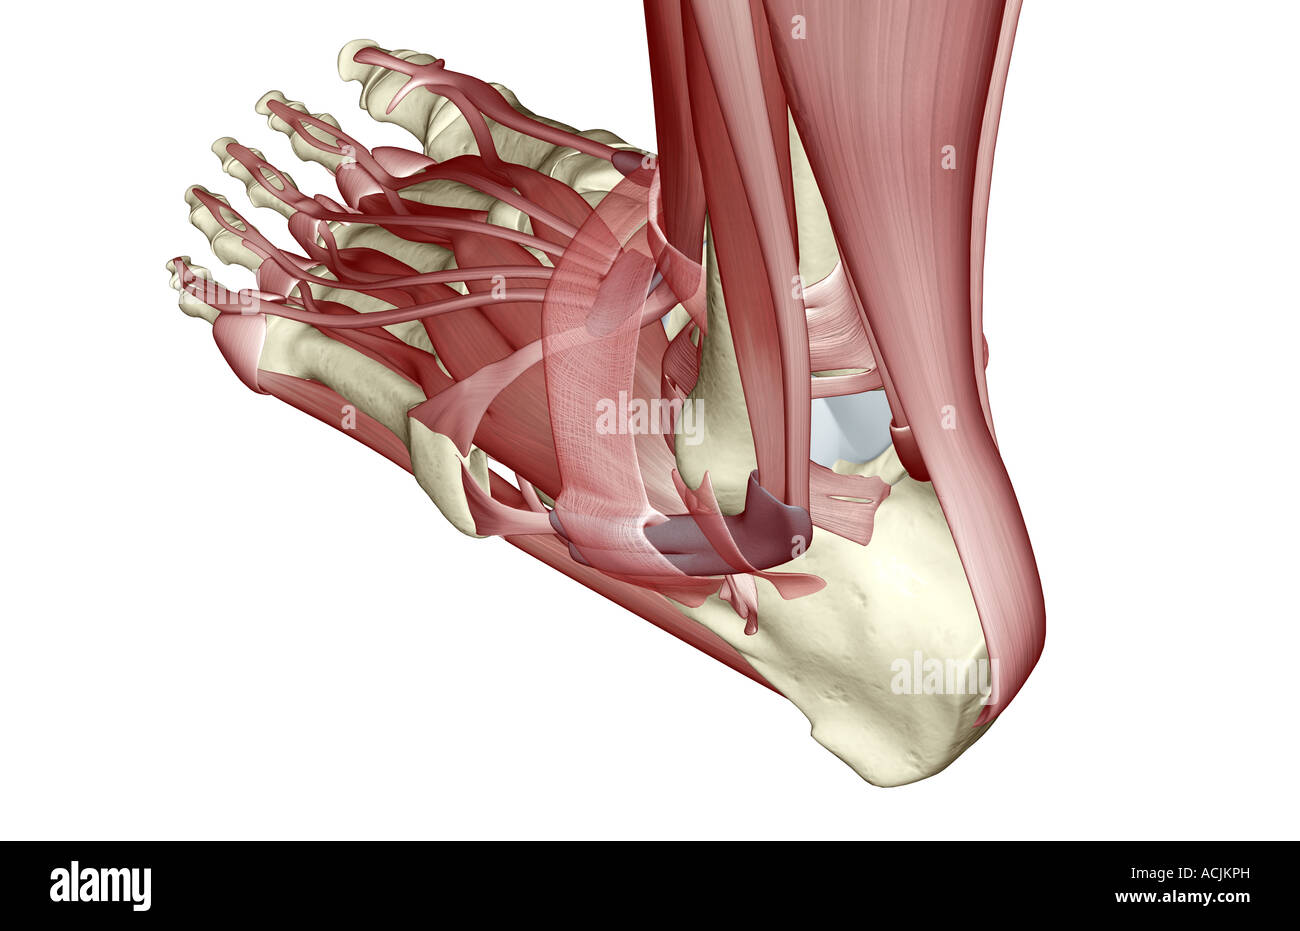 Muscles Of Foot High Resolution Stock Photography And Images Alamy